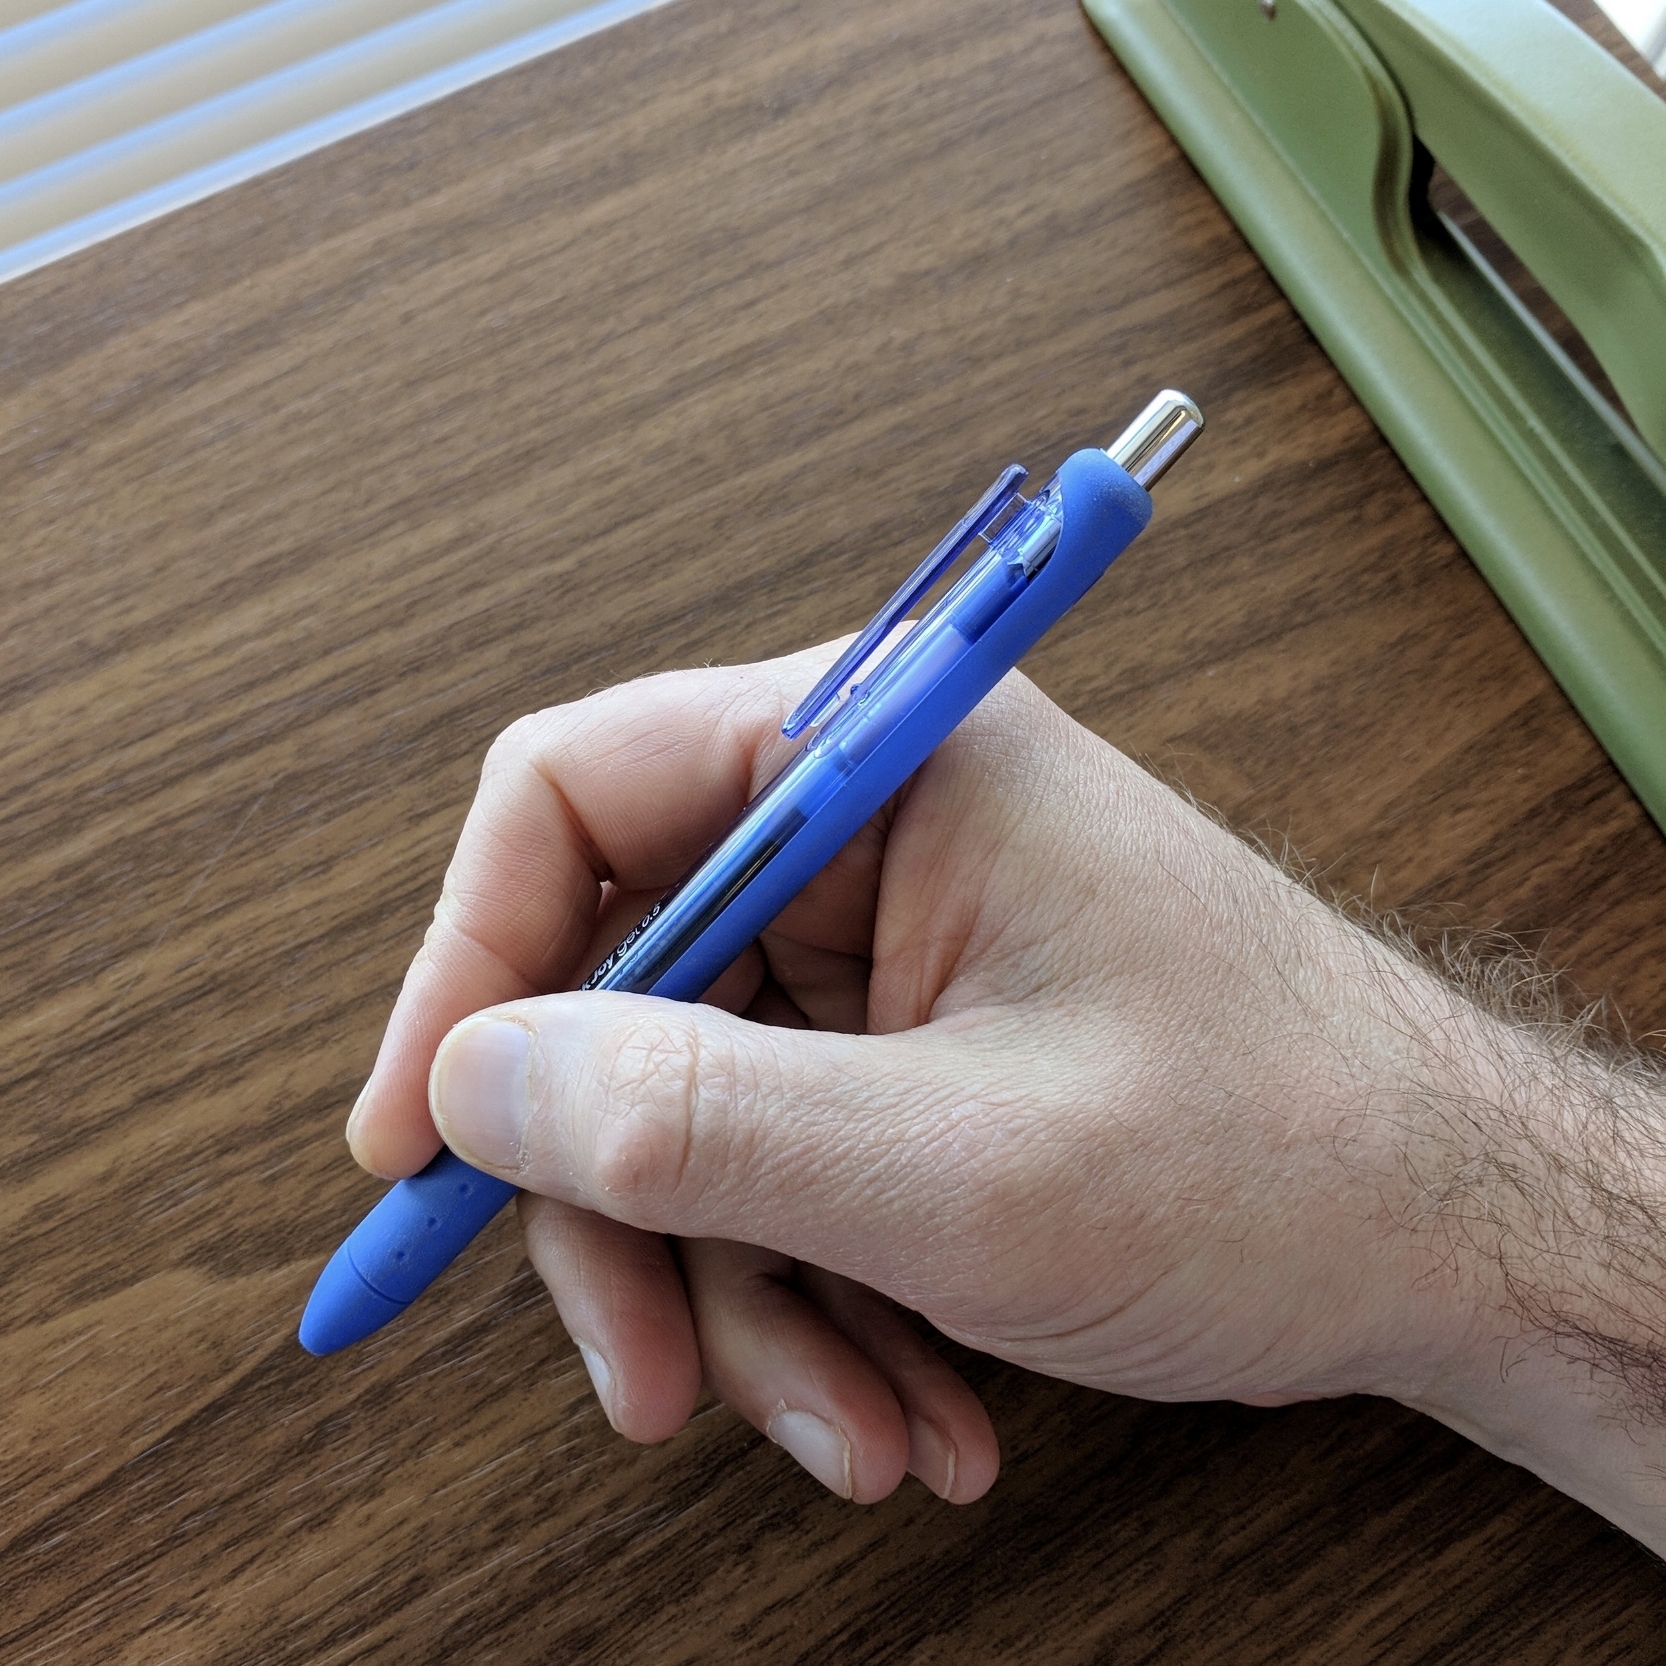 Paperhaters Need Not Apply: The Papermate Inkjoy Gel — The